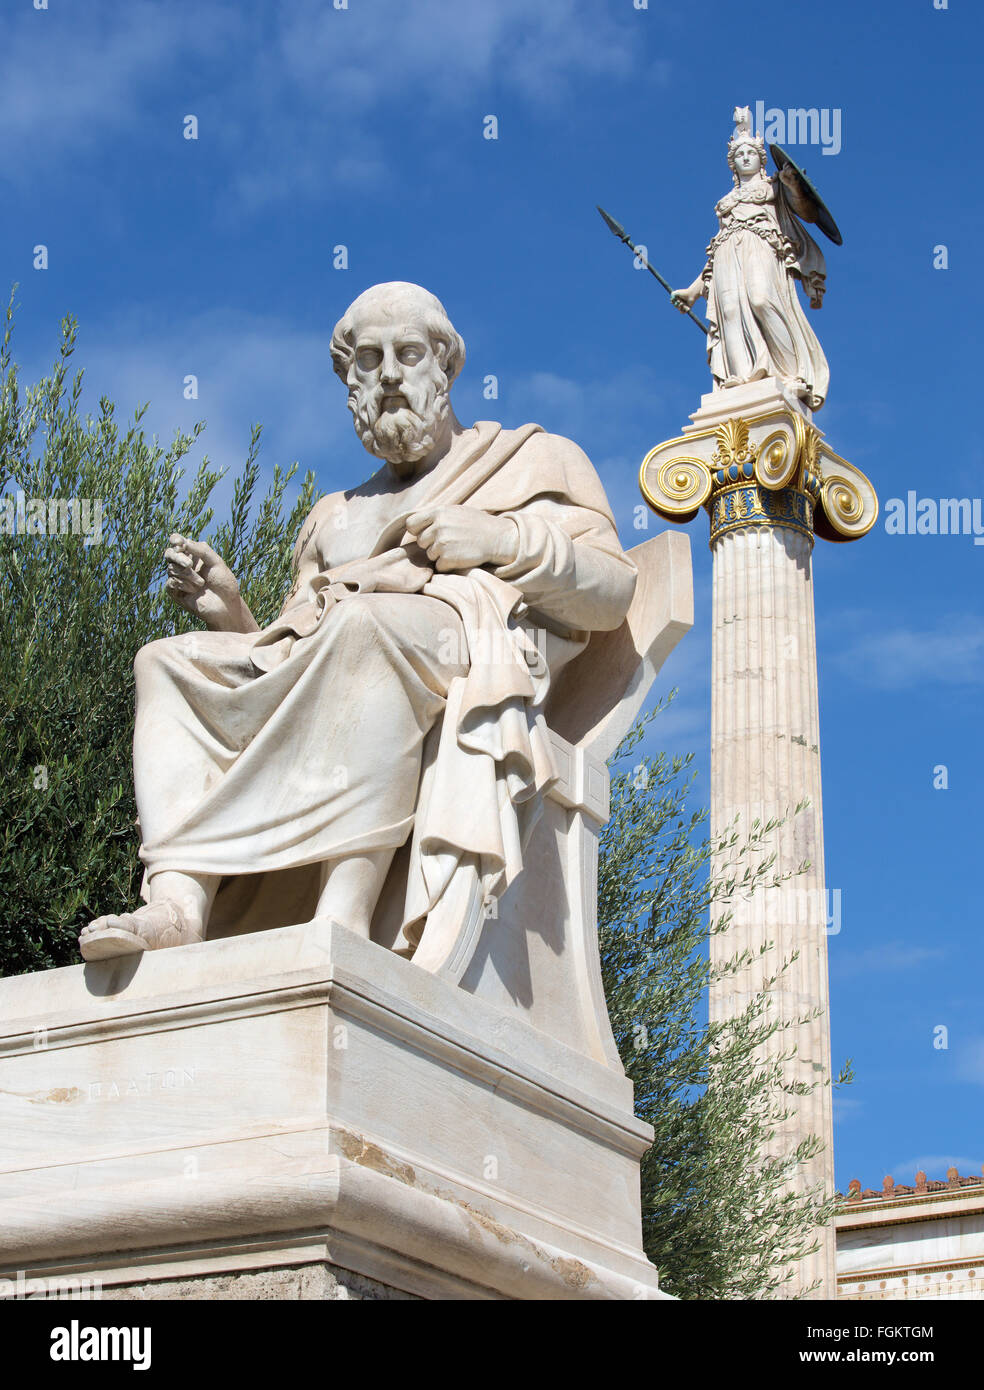 Athens - The statue of Plato in front of National Academy building by the Italian sculptor Piccarelli (from 19. cent.). Stock Photo